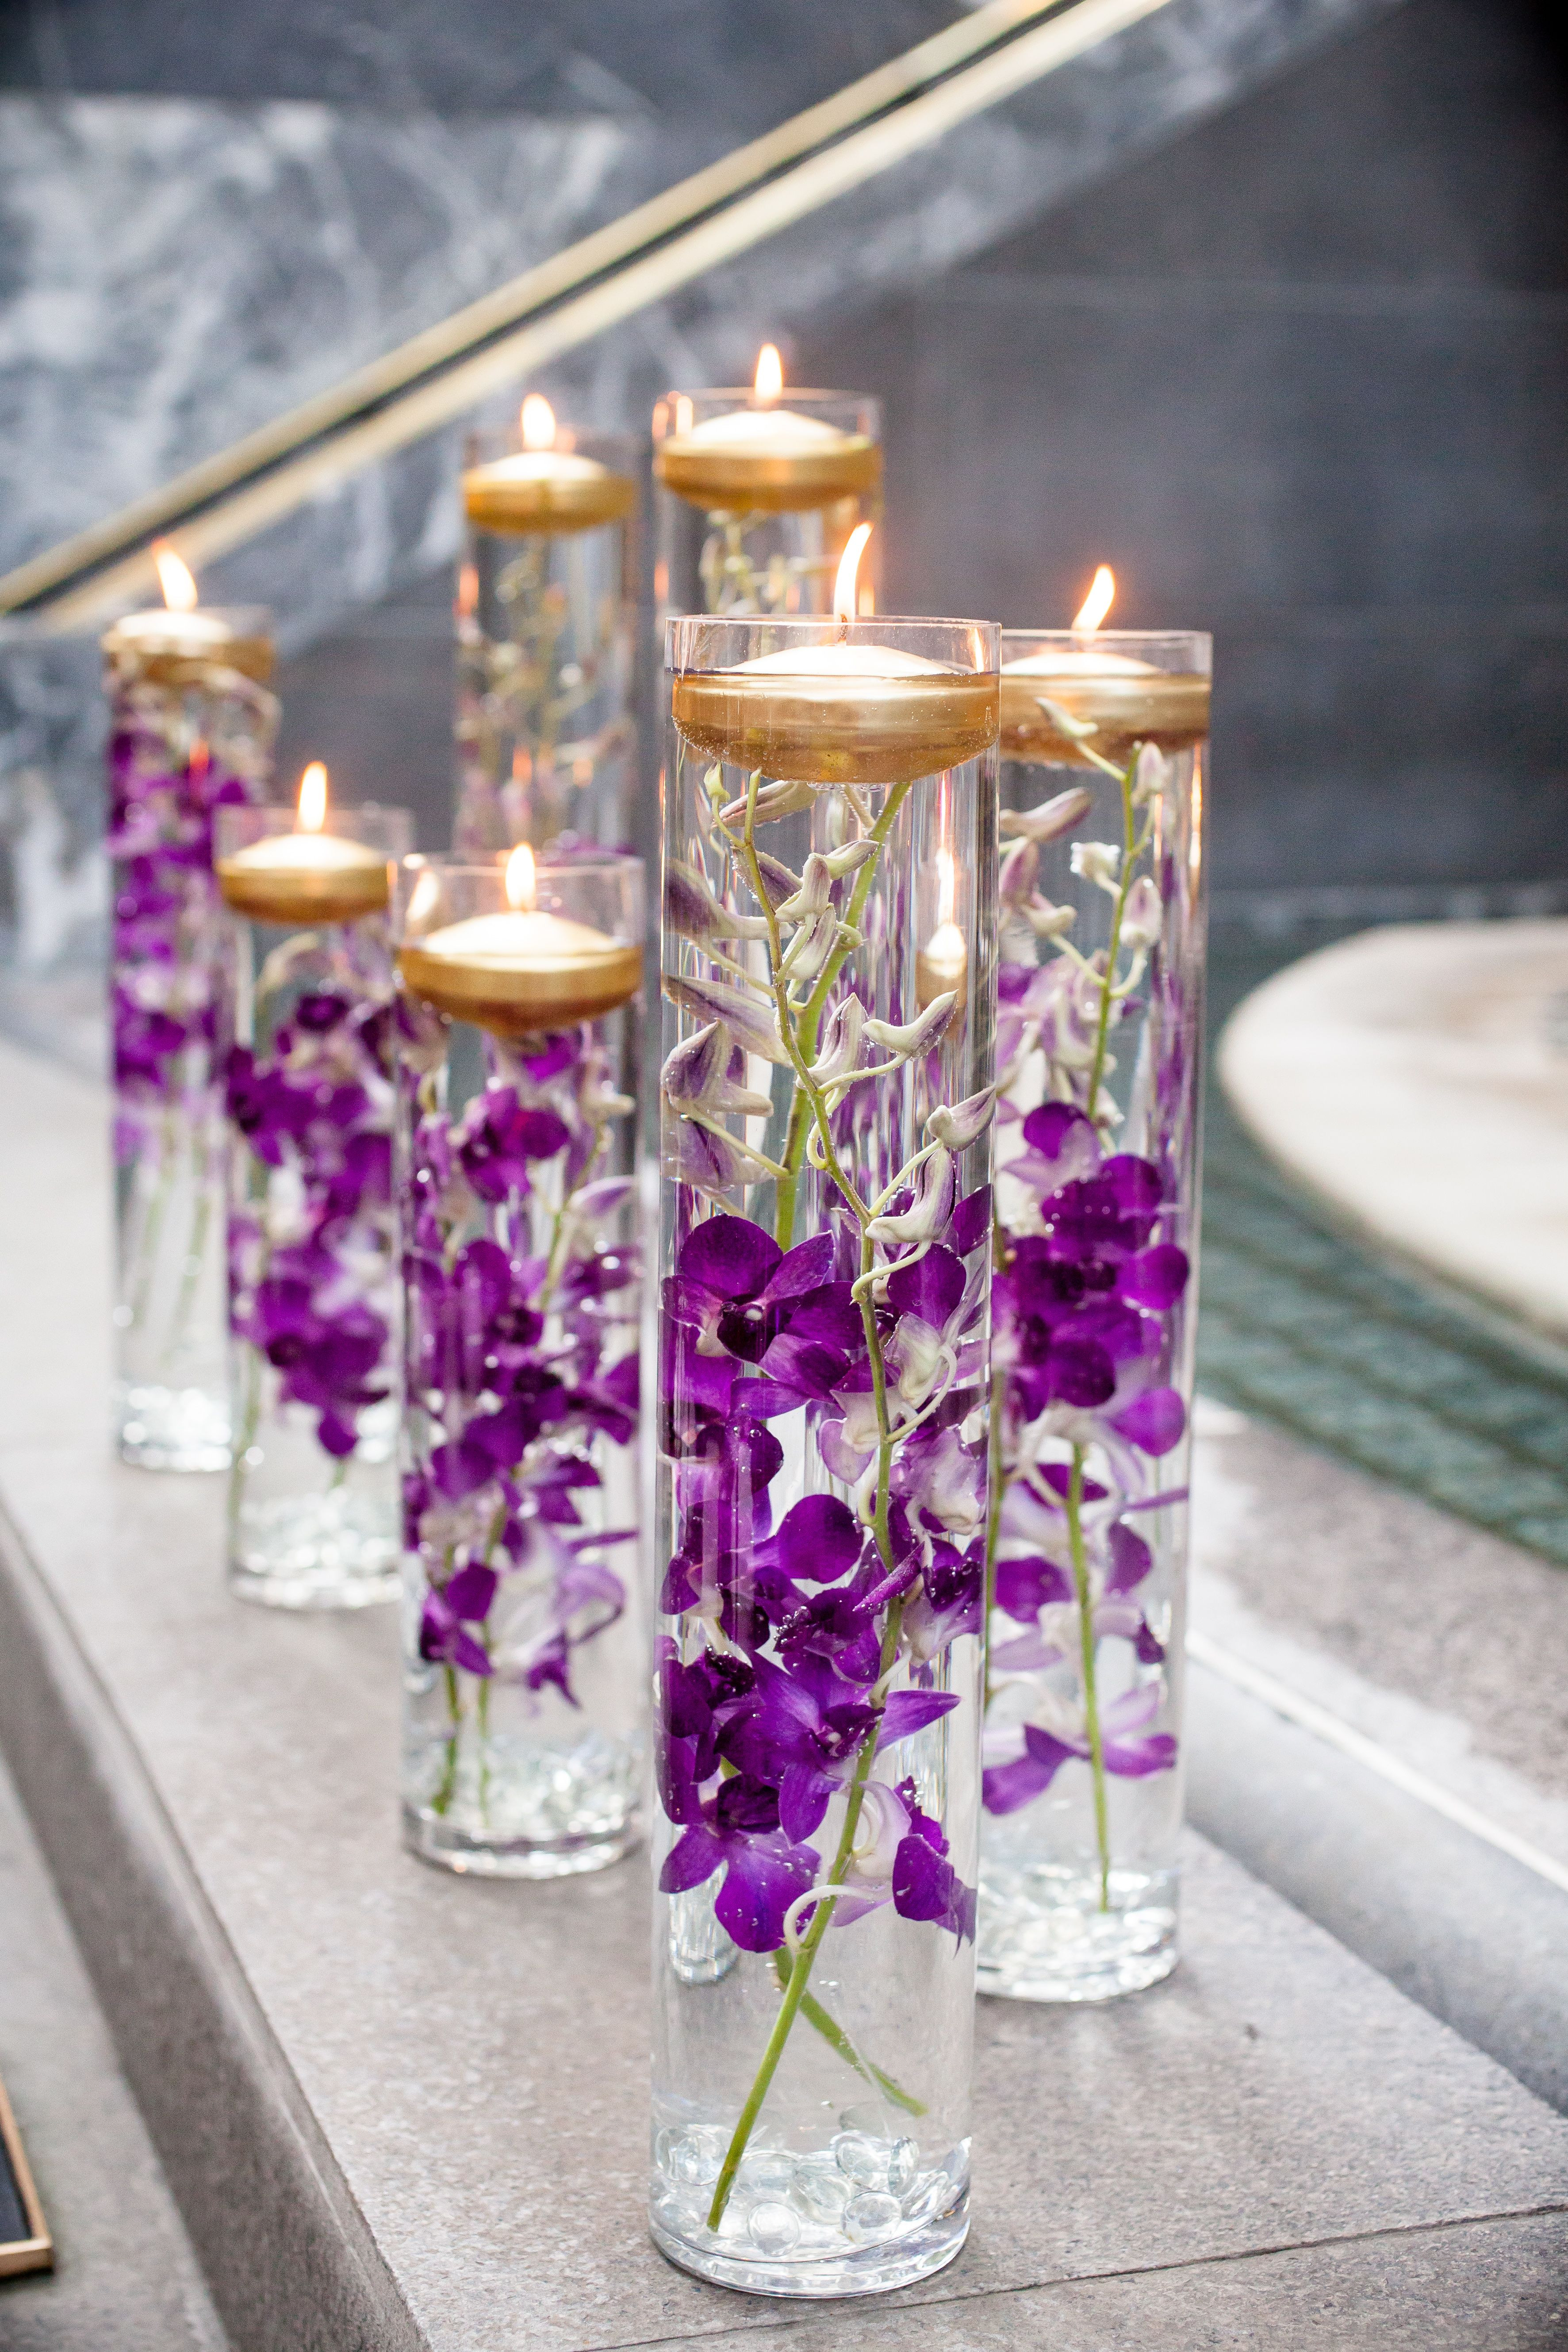 Wedding Engagement Party Ideas
 Glass Vases With Purple Orchids and Floating Candles